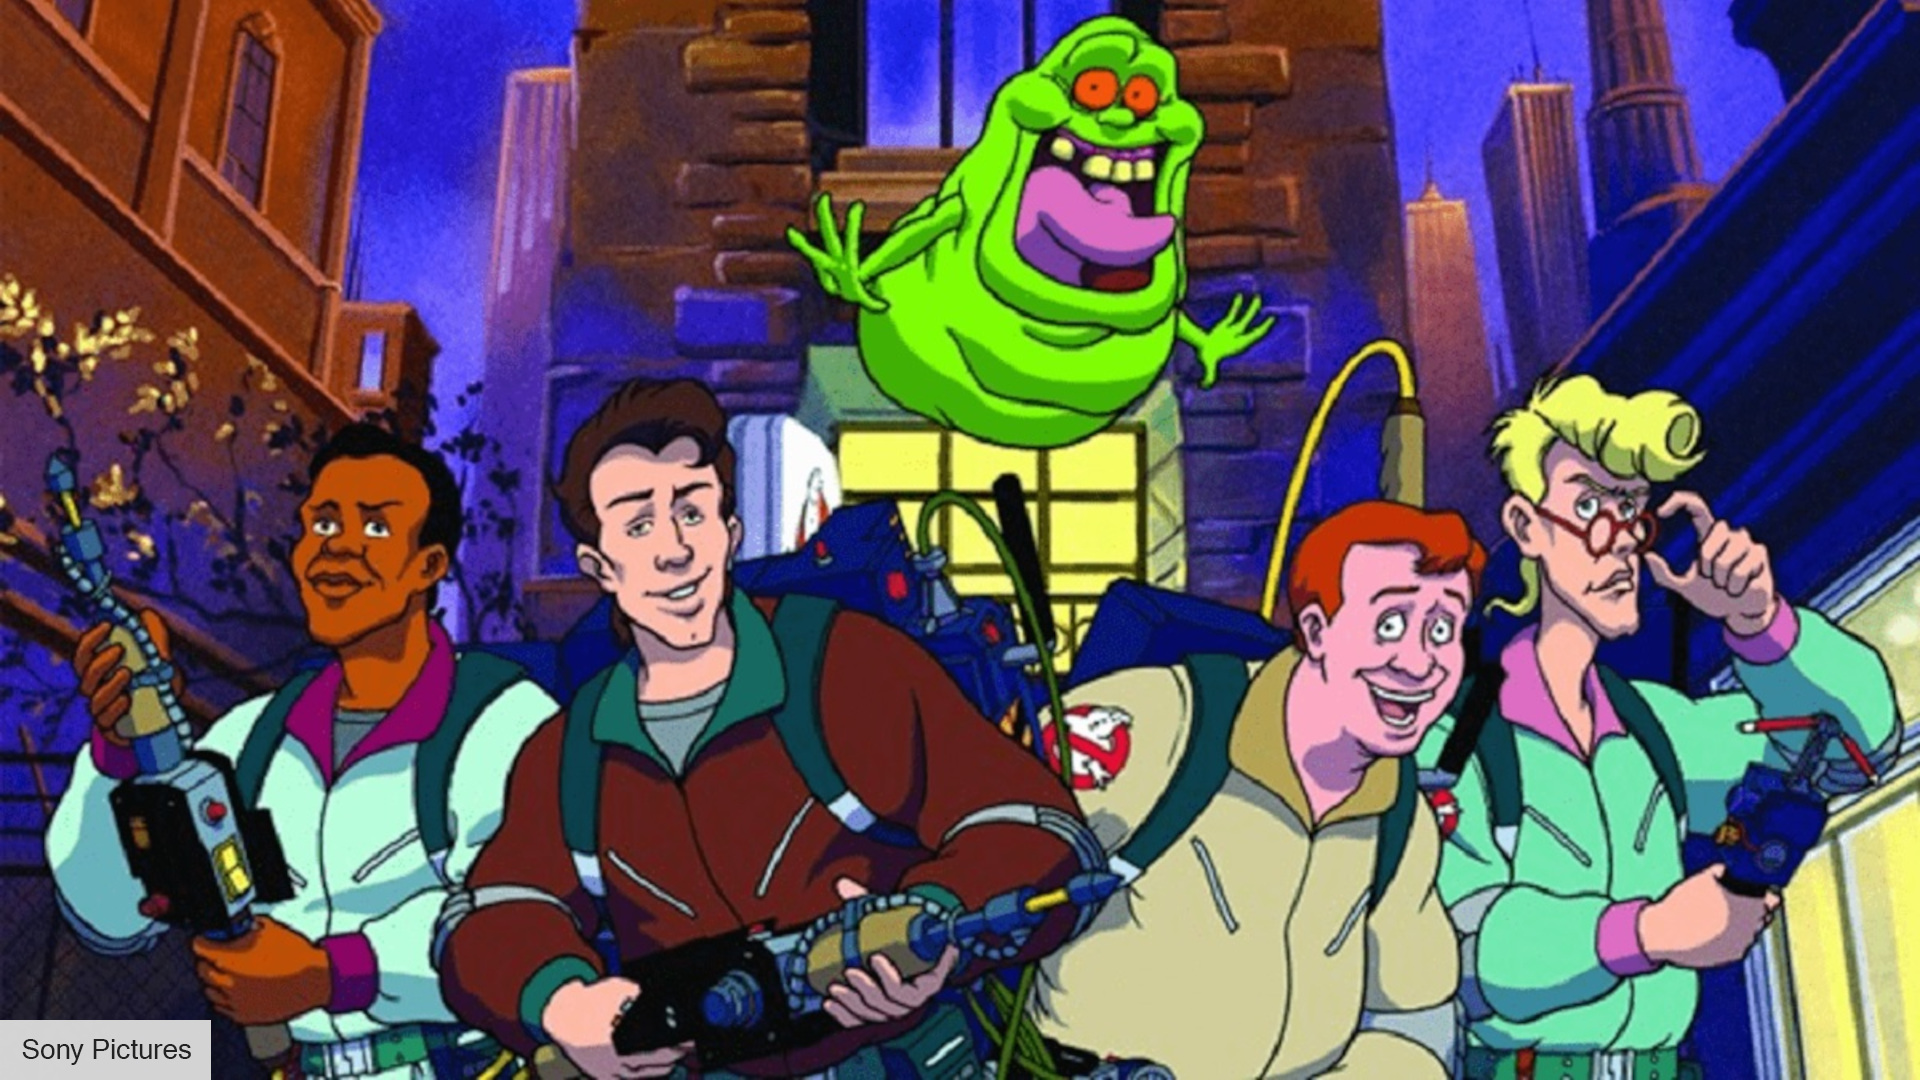 Ghostbusters animated series coming to Netflix from Jason Reitman | The  Digital Fix